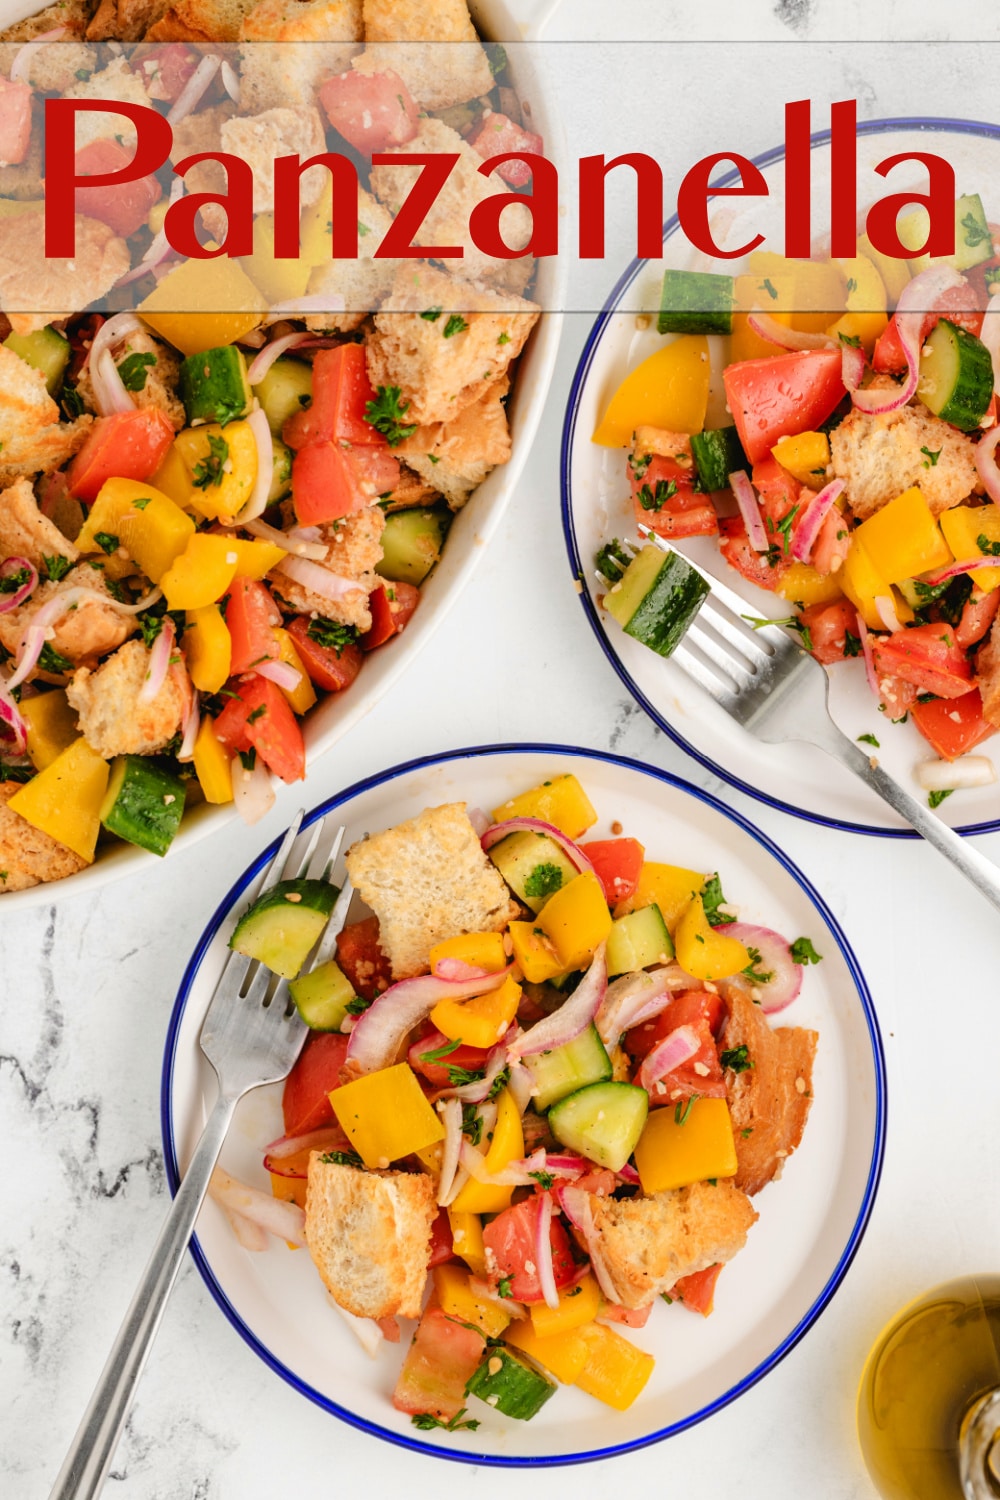 This Panzanella bread salad recipe, made with crusty bread and juicy tomatoes, is a delicious Italian classic recipe. via @cmpollak1